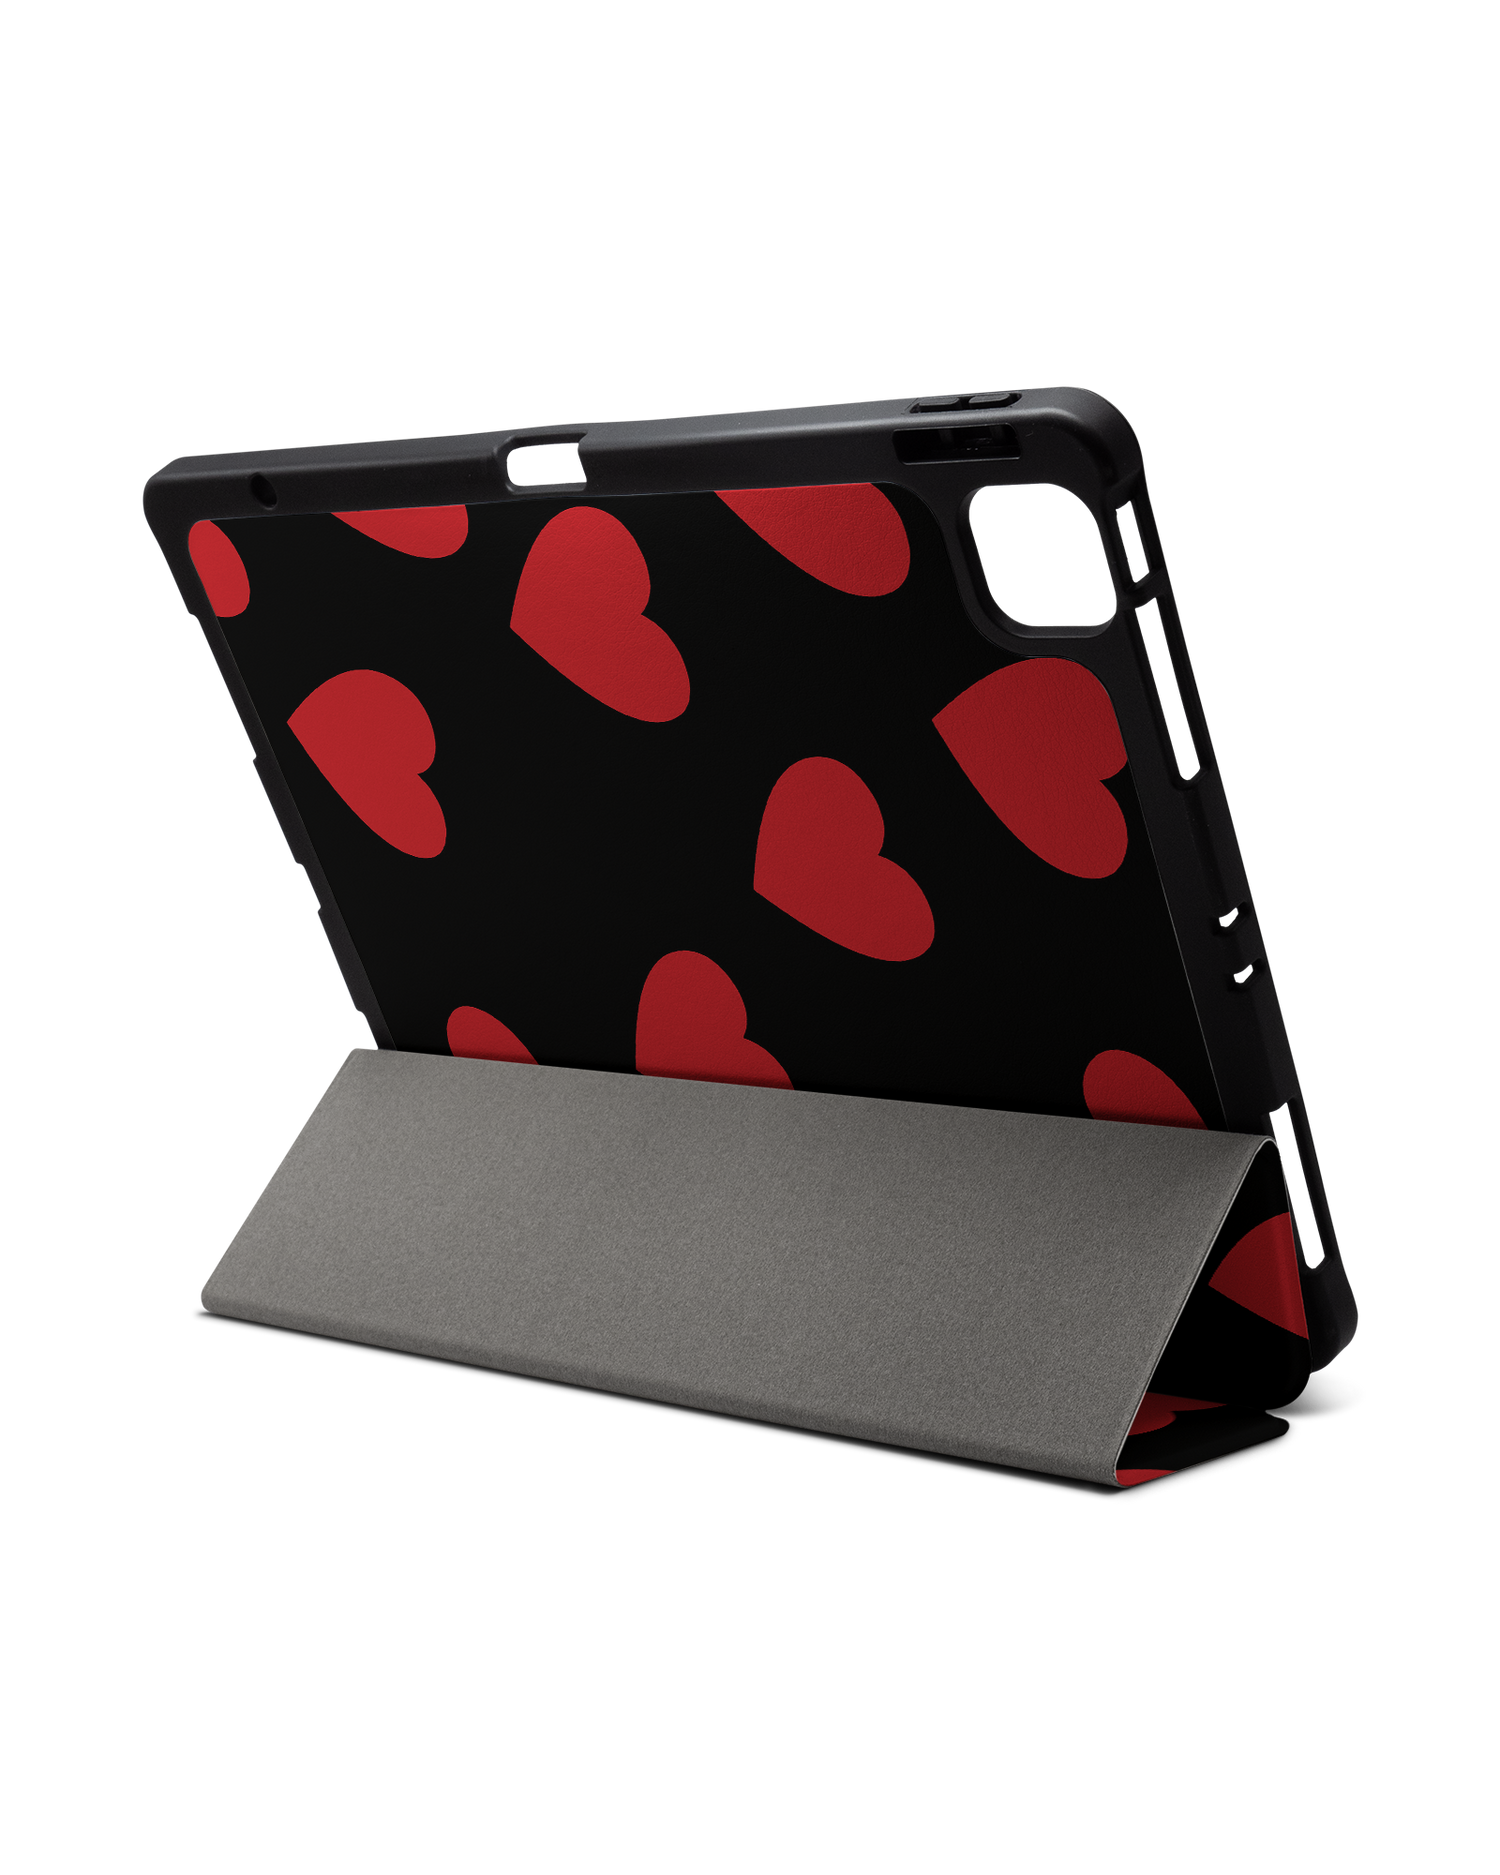 Repeating Hearts iPad Case with Pencil Holder for Apple iPad Pro 6 12.9